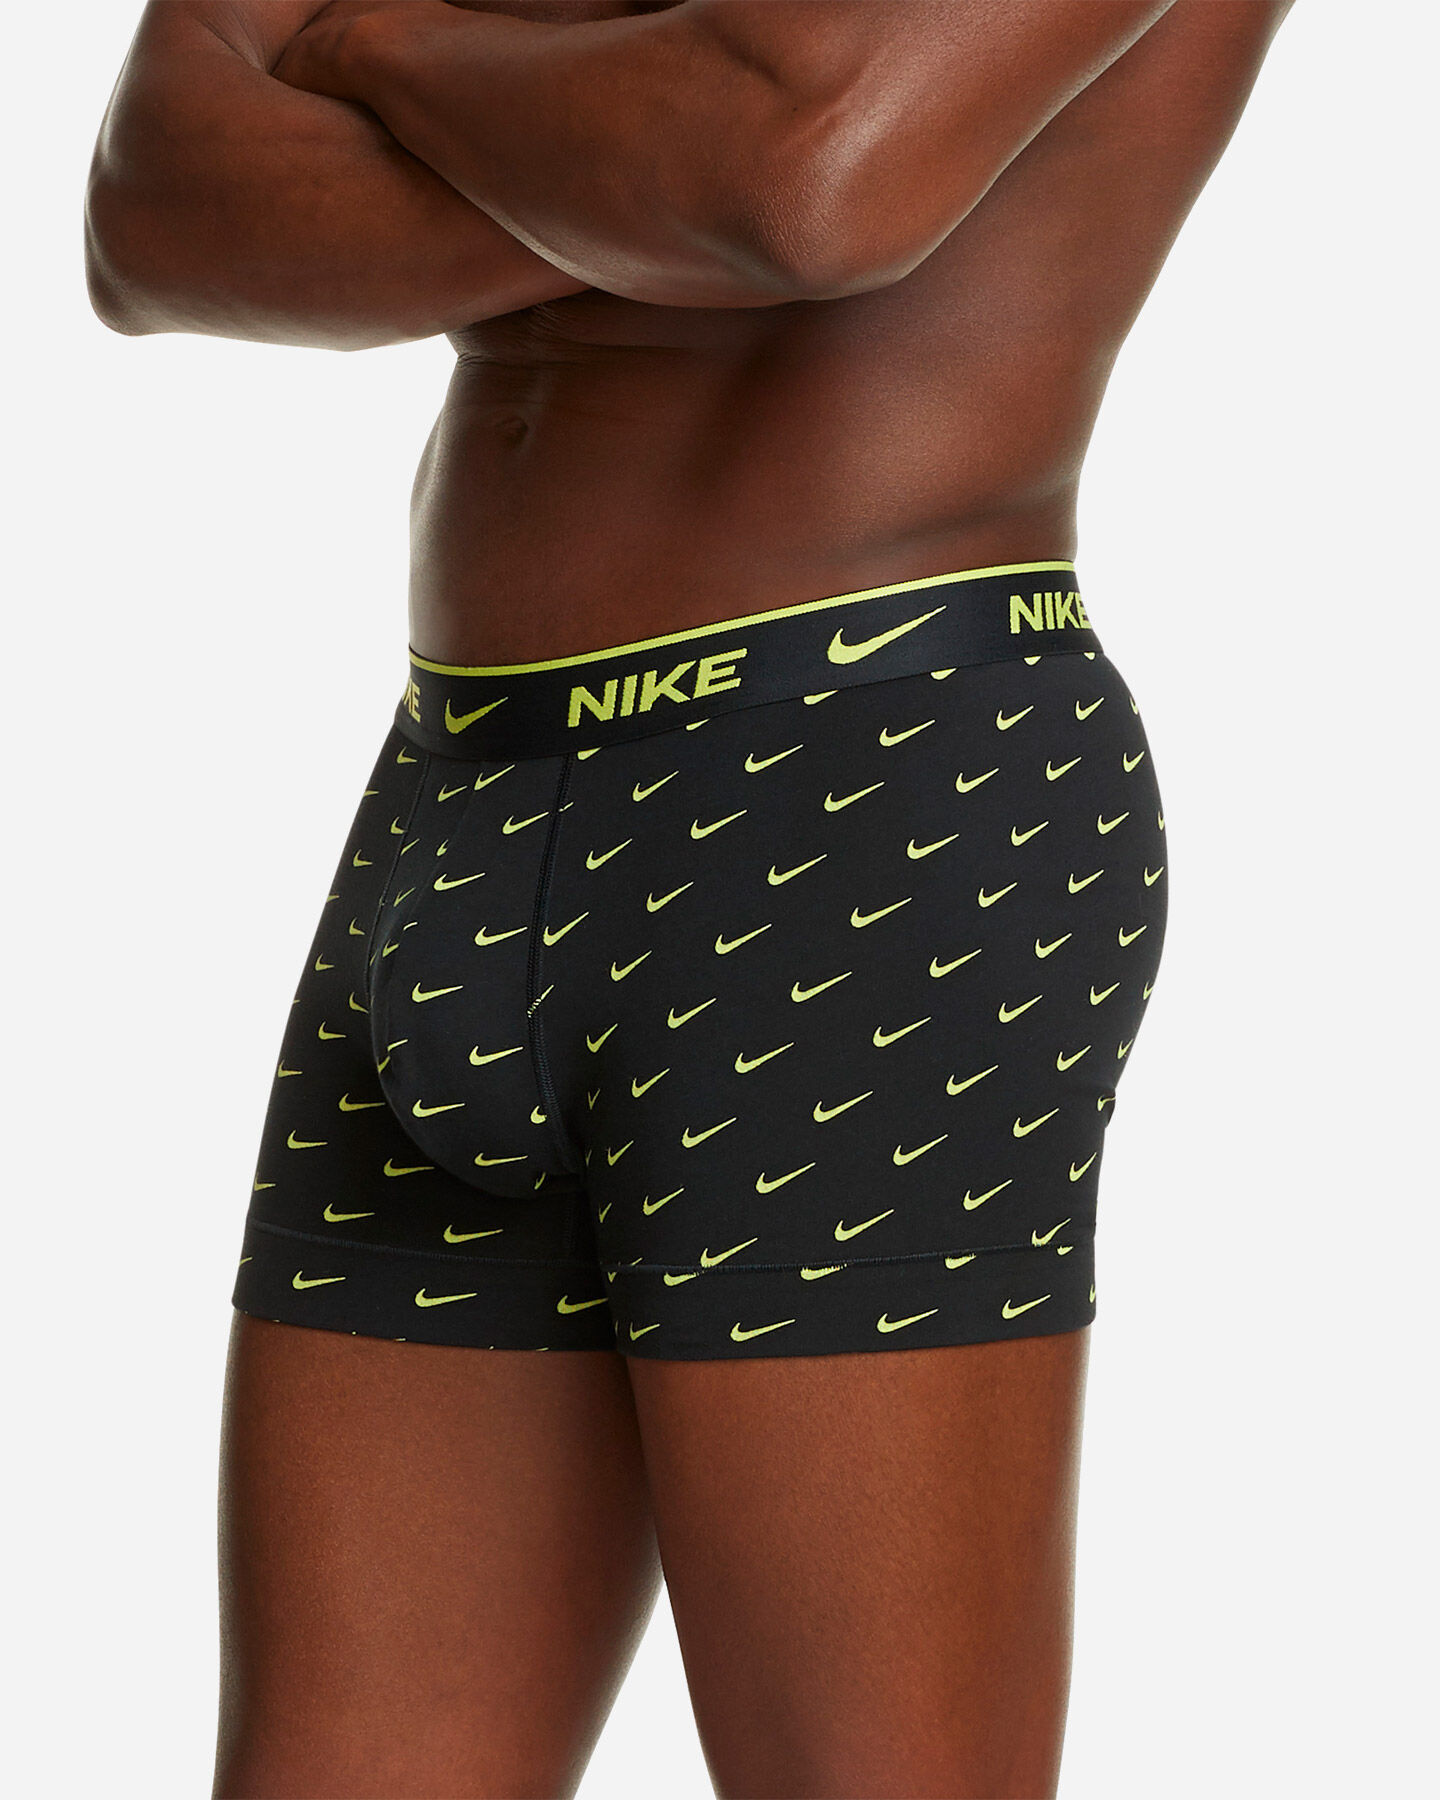  Intimo NIKE 3PACK BOXER EVERYDAY M S4095168|M1J|XS scatto 3